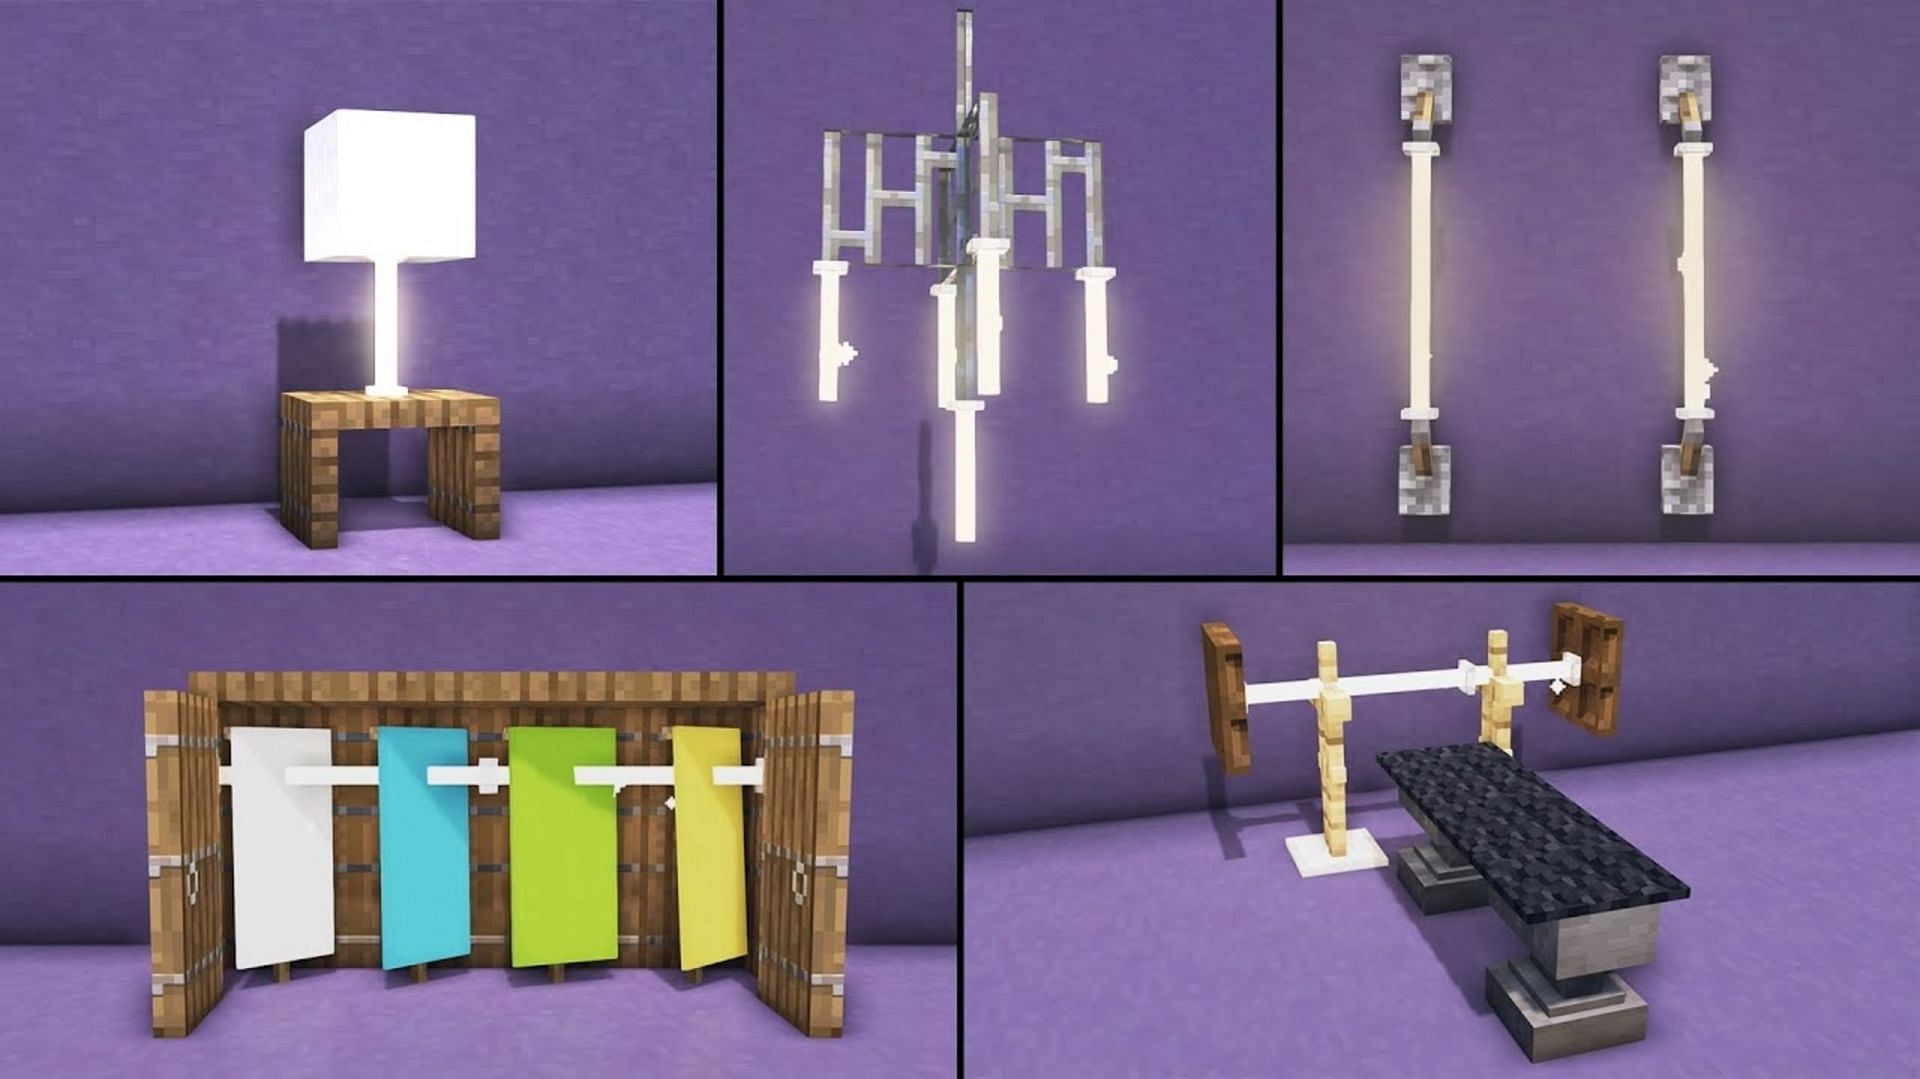 End rods have extensive decorative use (Image via Panda Games/YouTube)